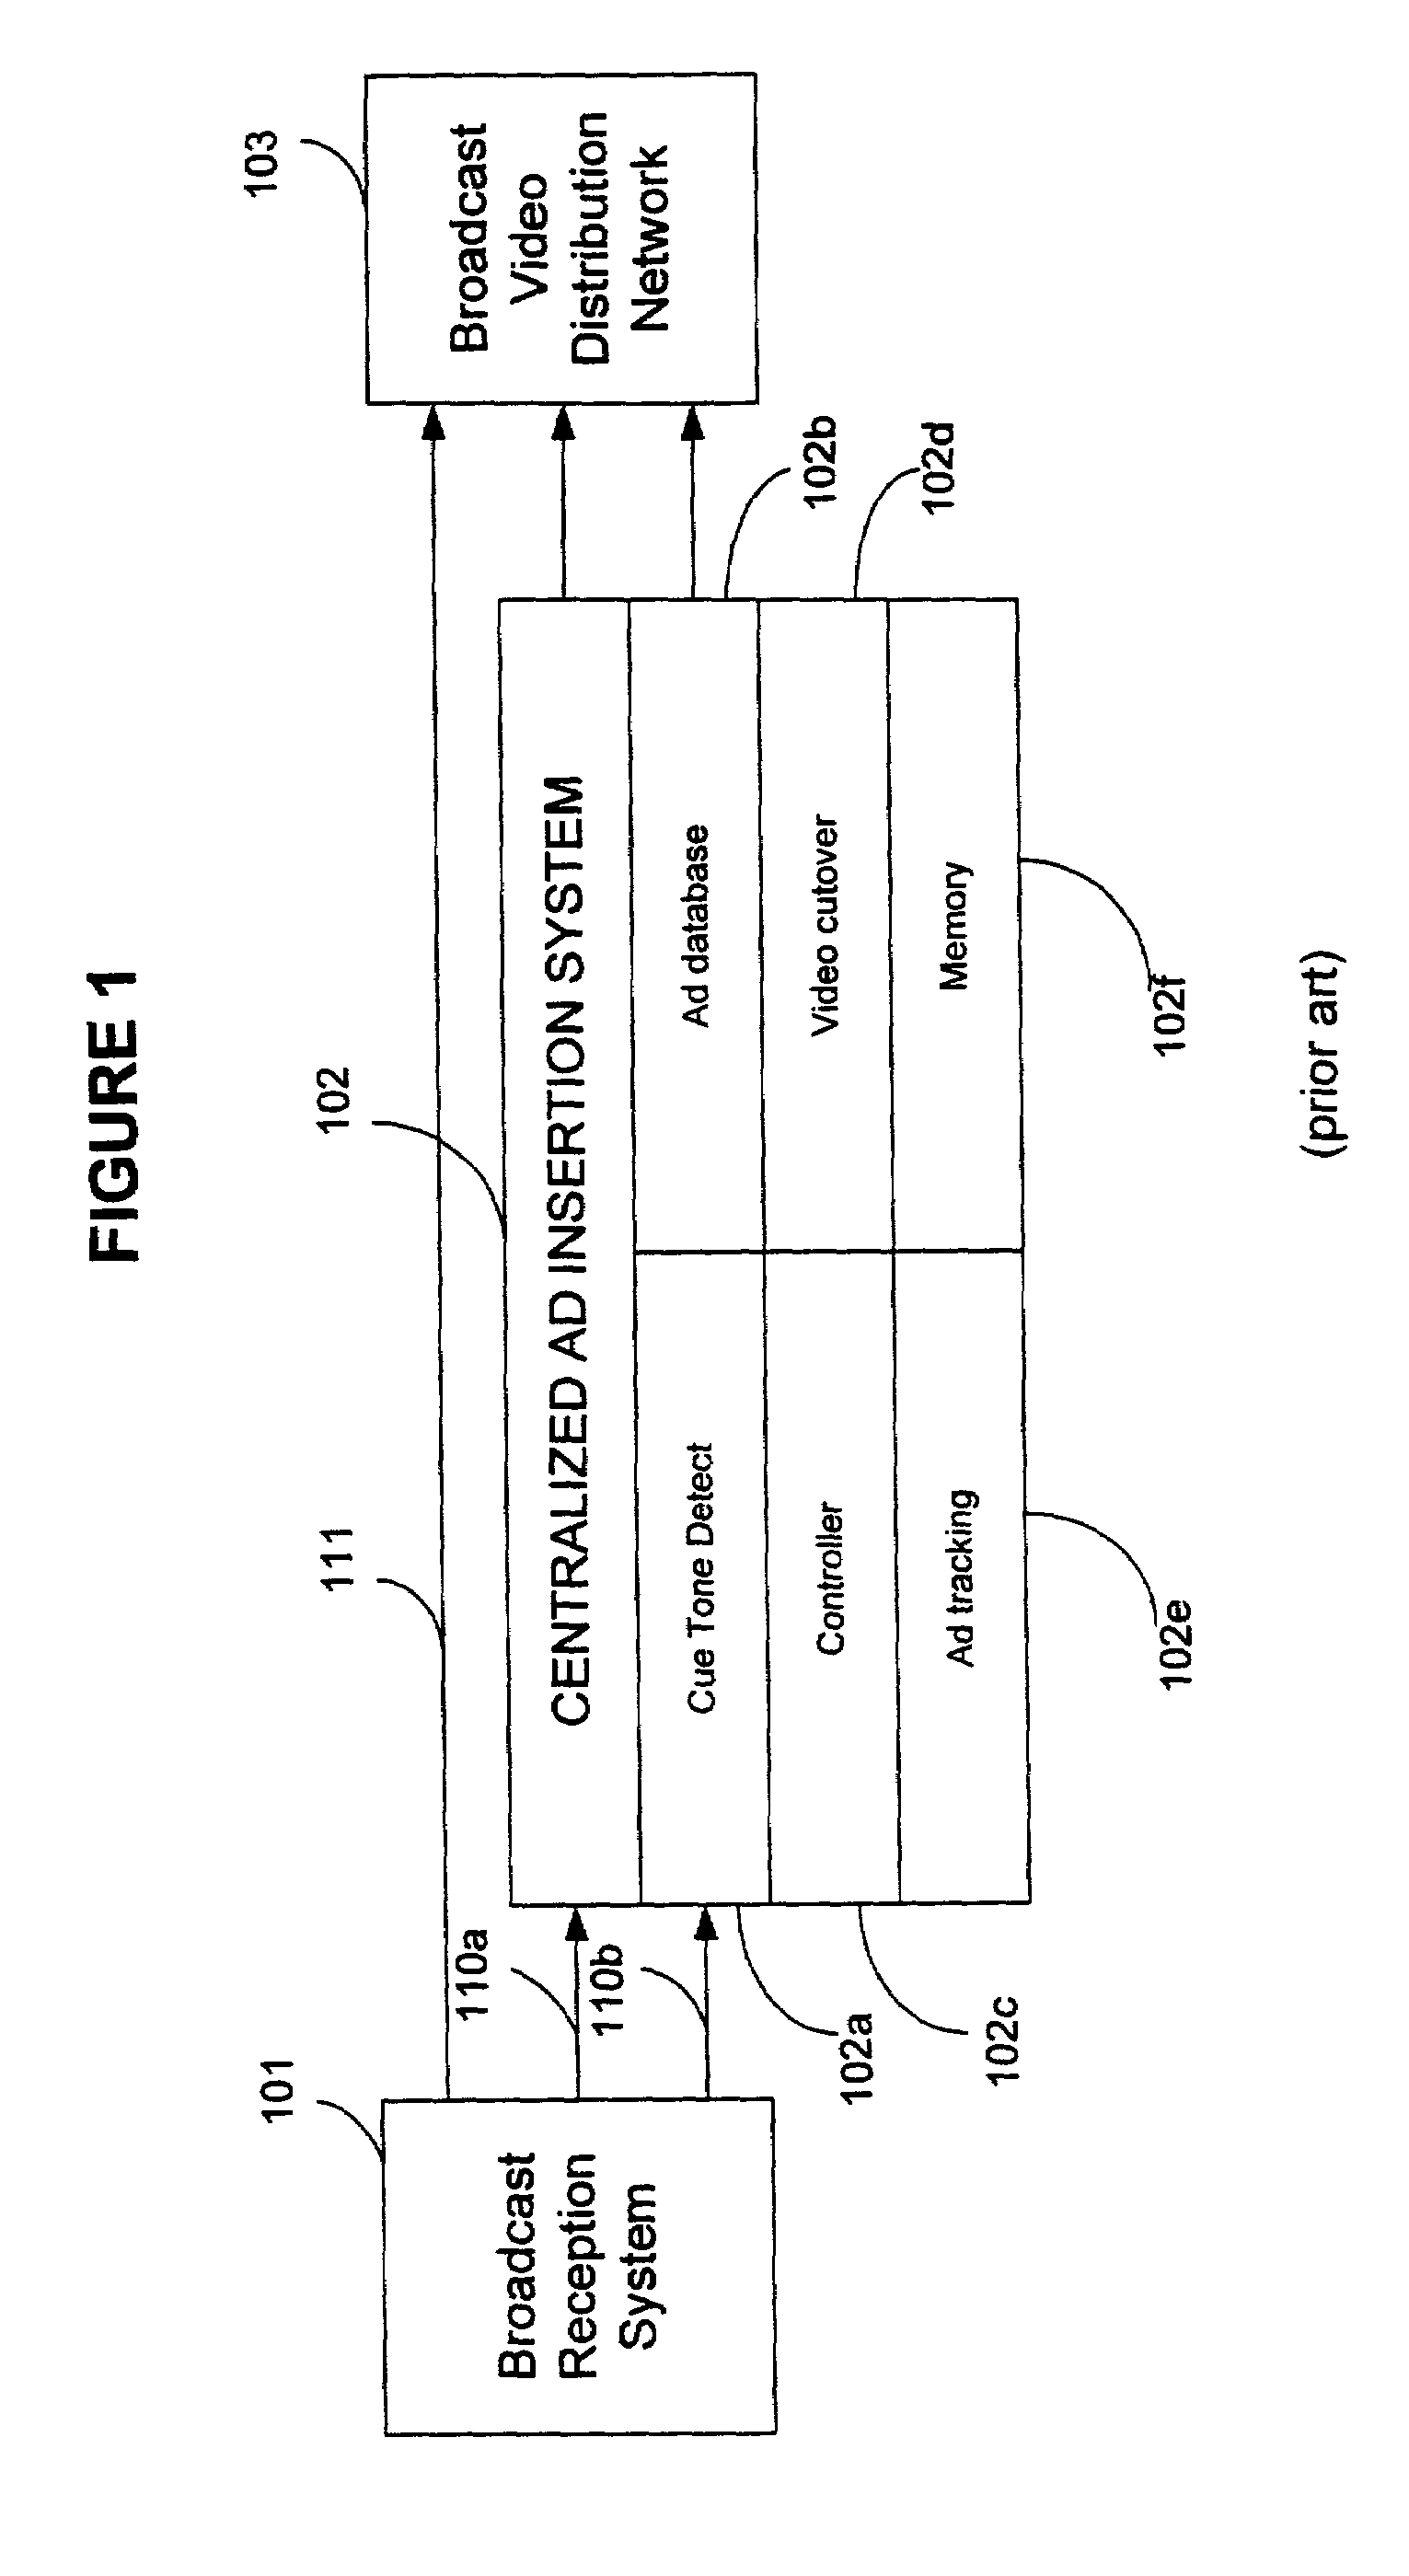 System and method for inserting advertising content in broadcast programming